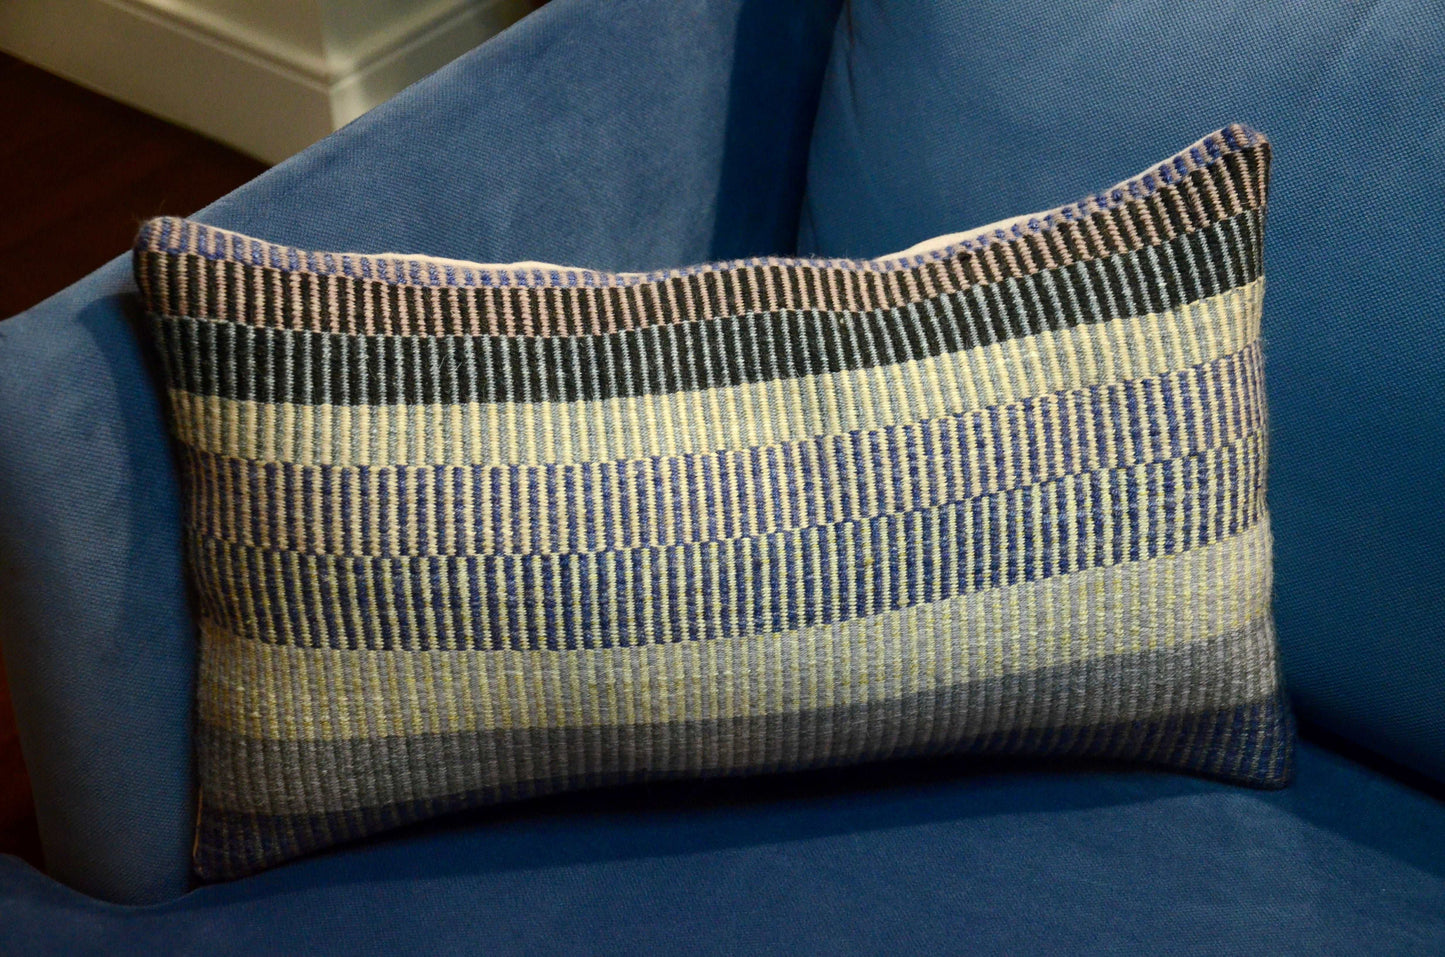 Blue & Grey Handwoven Throw Pillow Covers with cool tones Edit